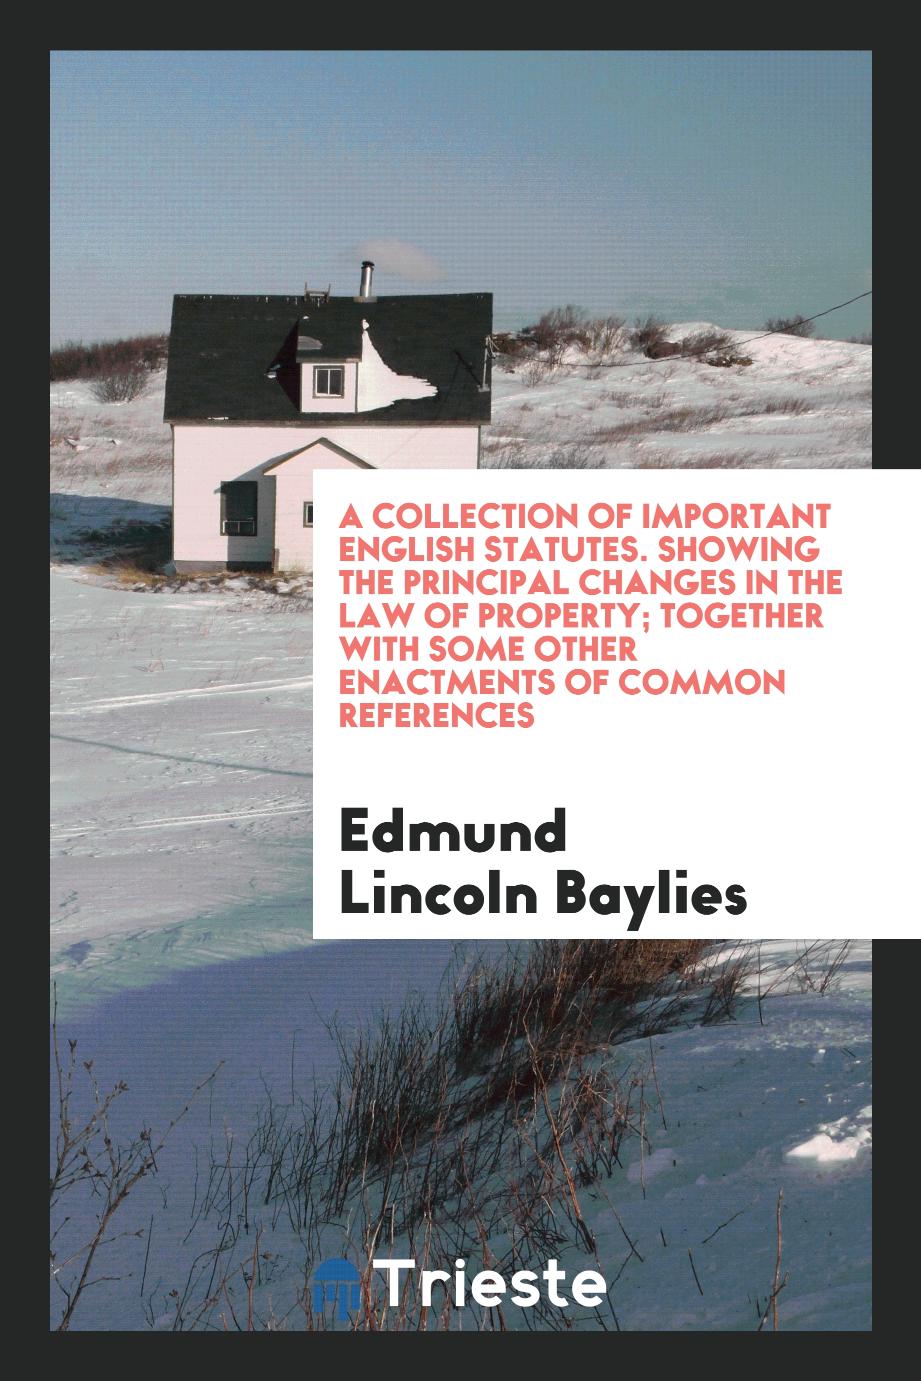 A Collection of Important English Statutes. Showing the Principal Changes in the Law of Property; Together with Some Other Enactments of Common References